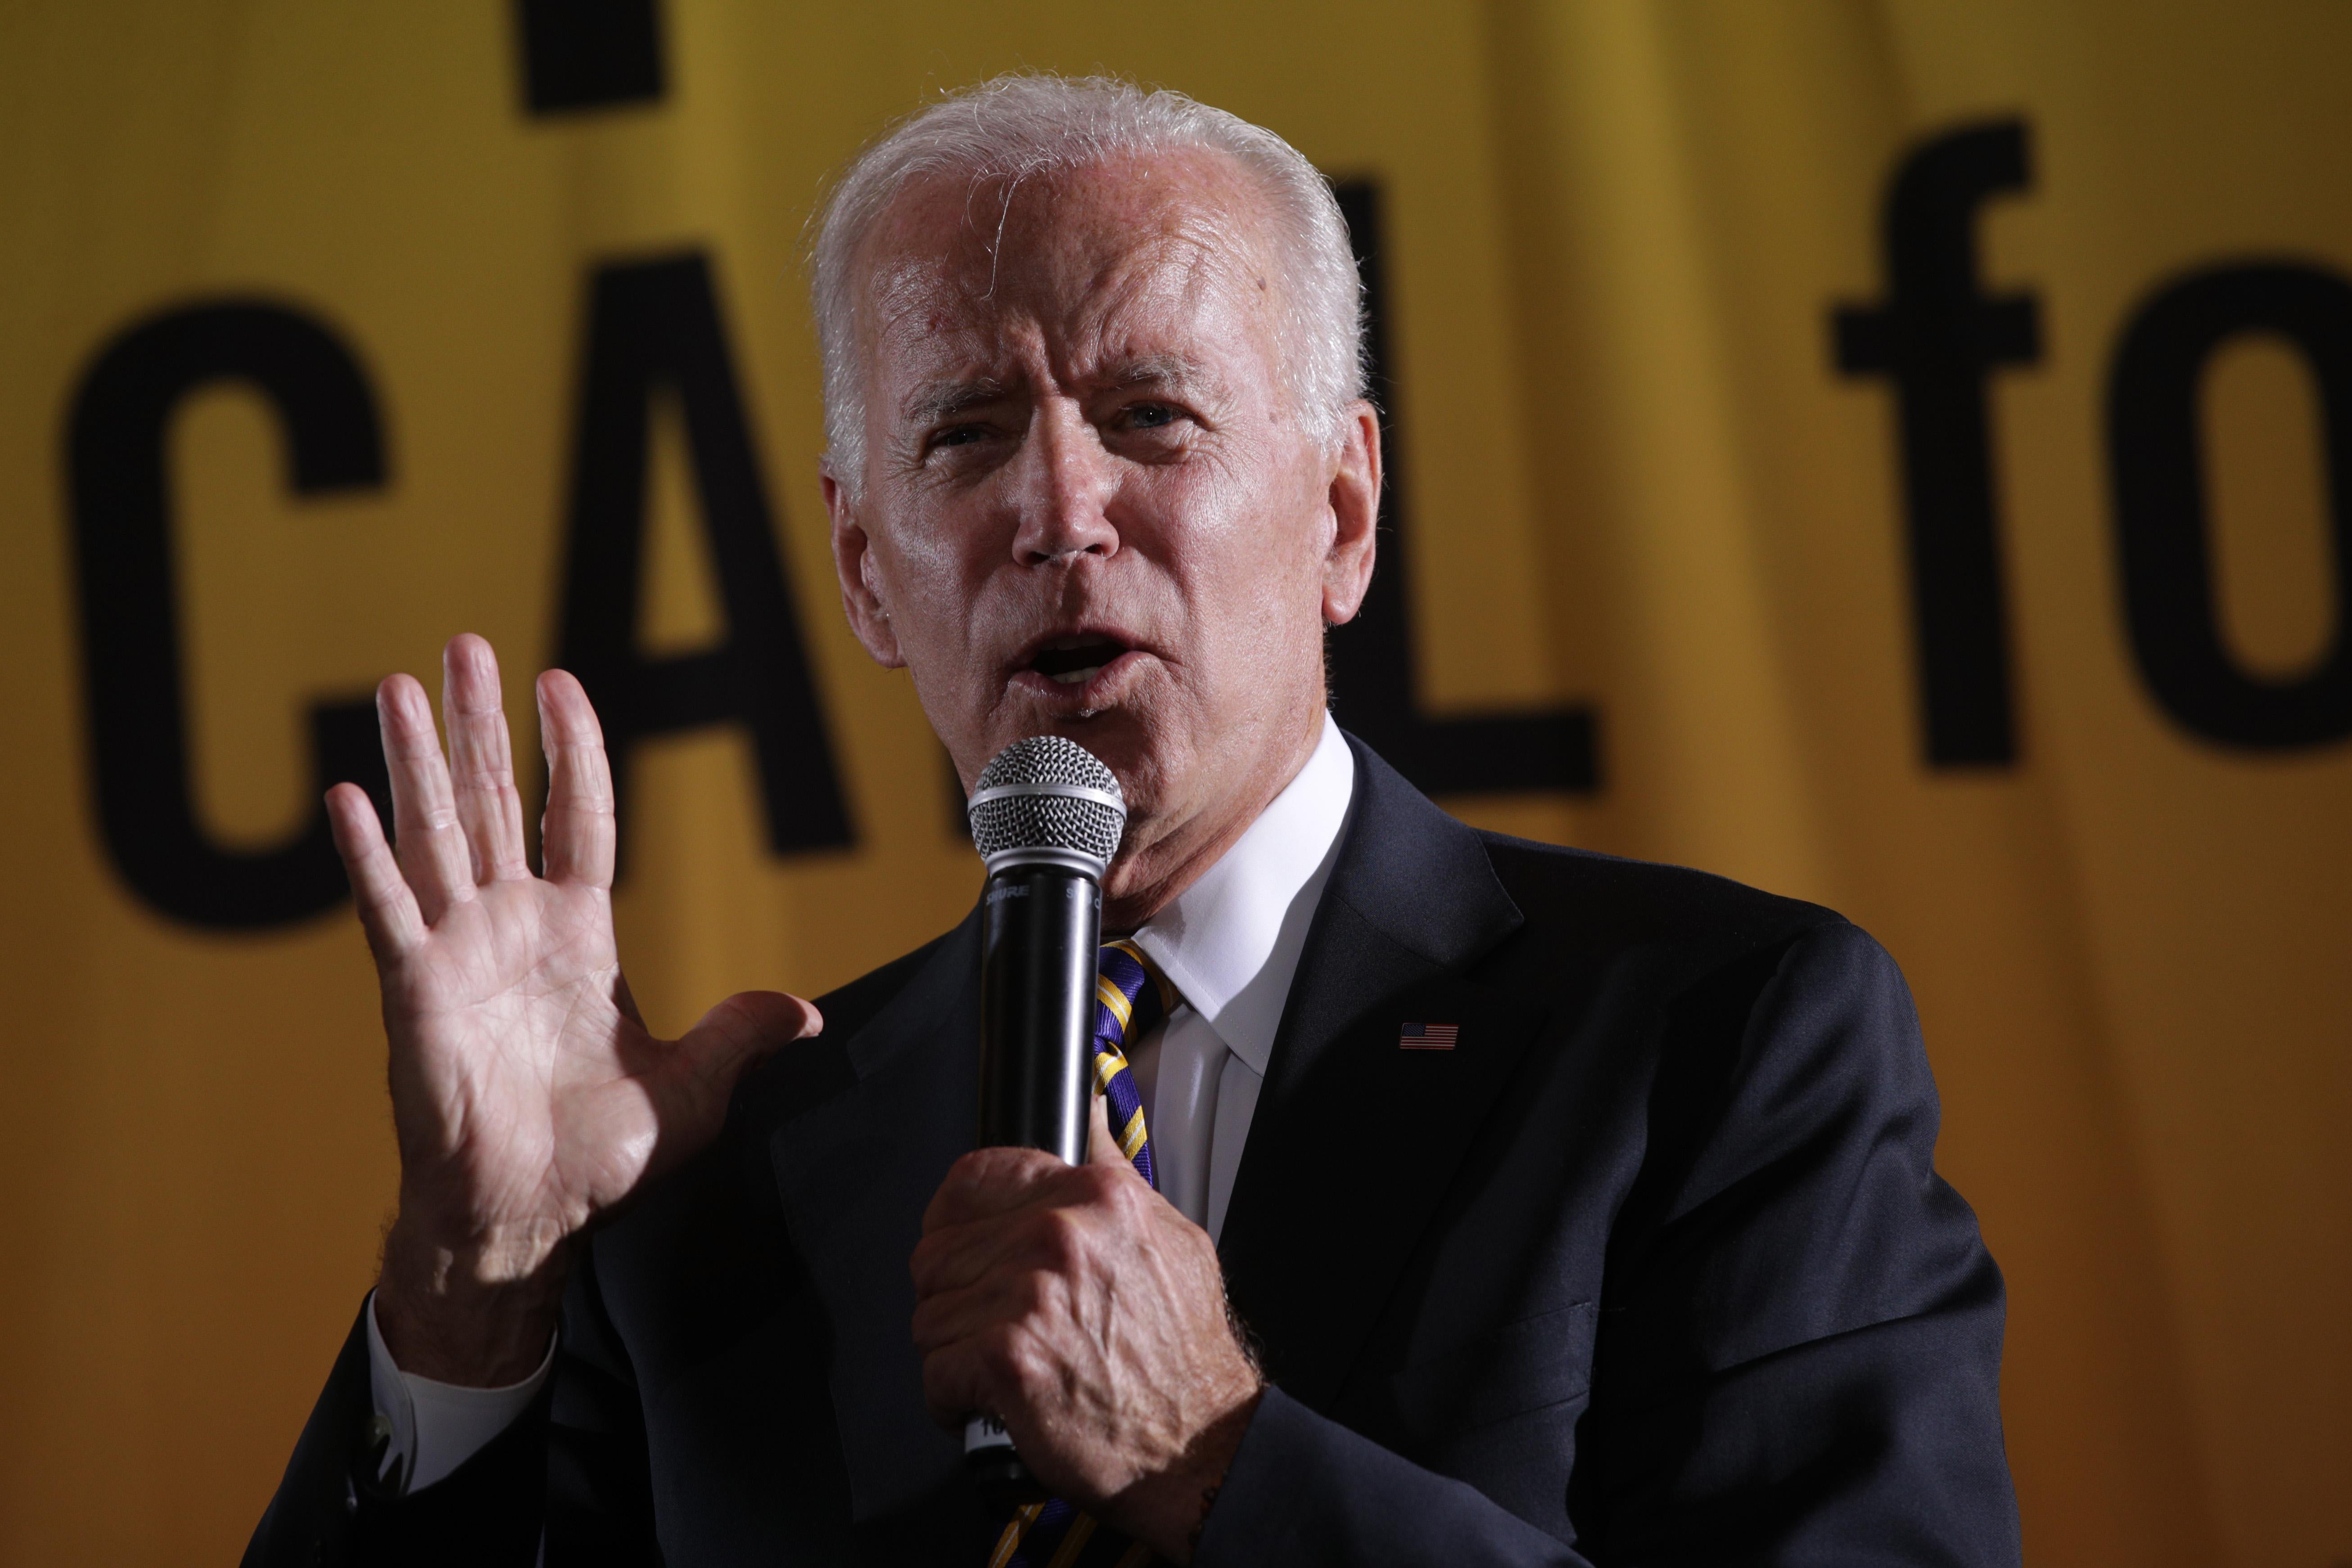 Democratic U.S. presidential hopeful and former Vice President Joe Biden addresses the Moral Action Congress of the Poor People’s Campaign on Monday in Washington, D.C.